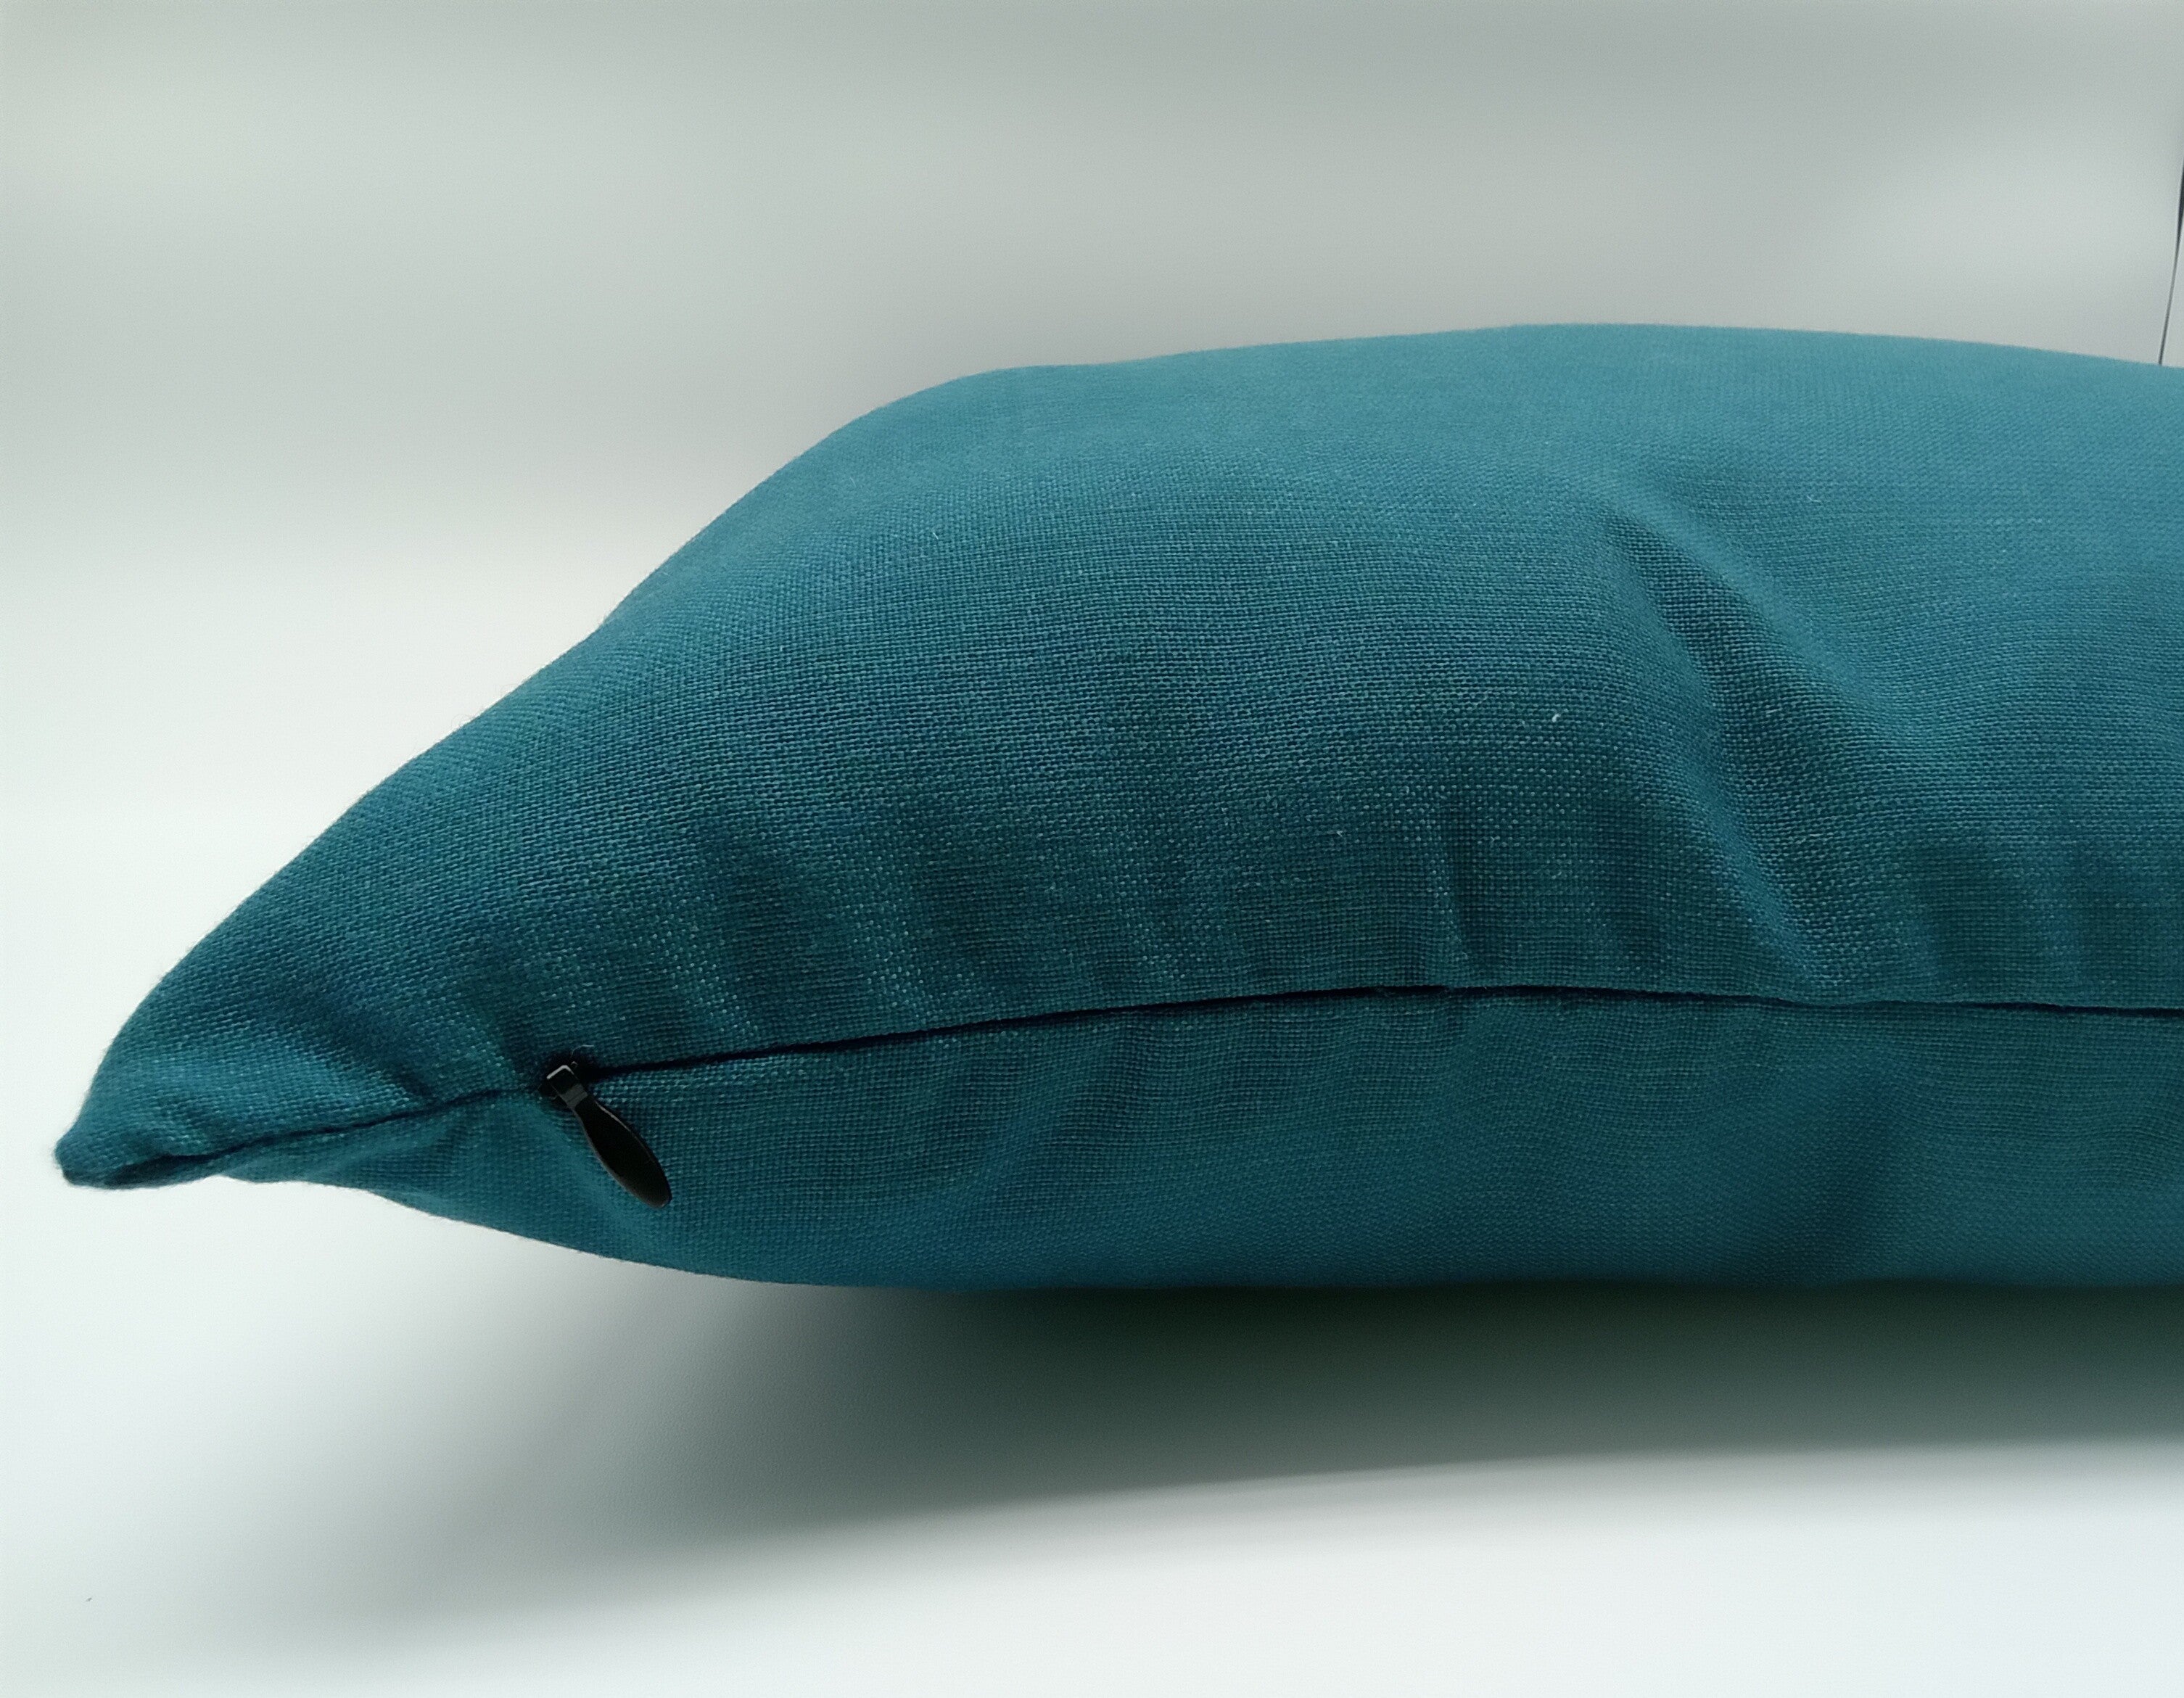 The Outdoor Collections: Teal